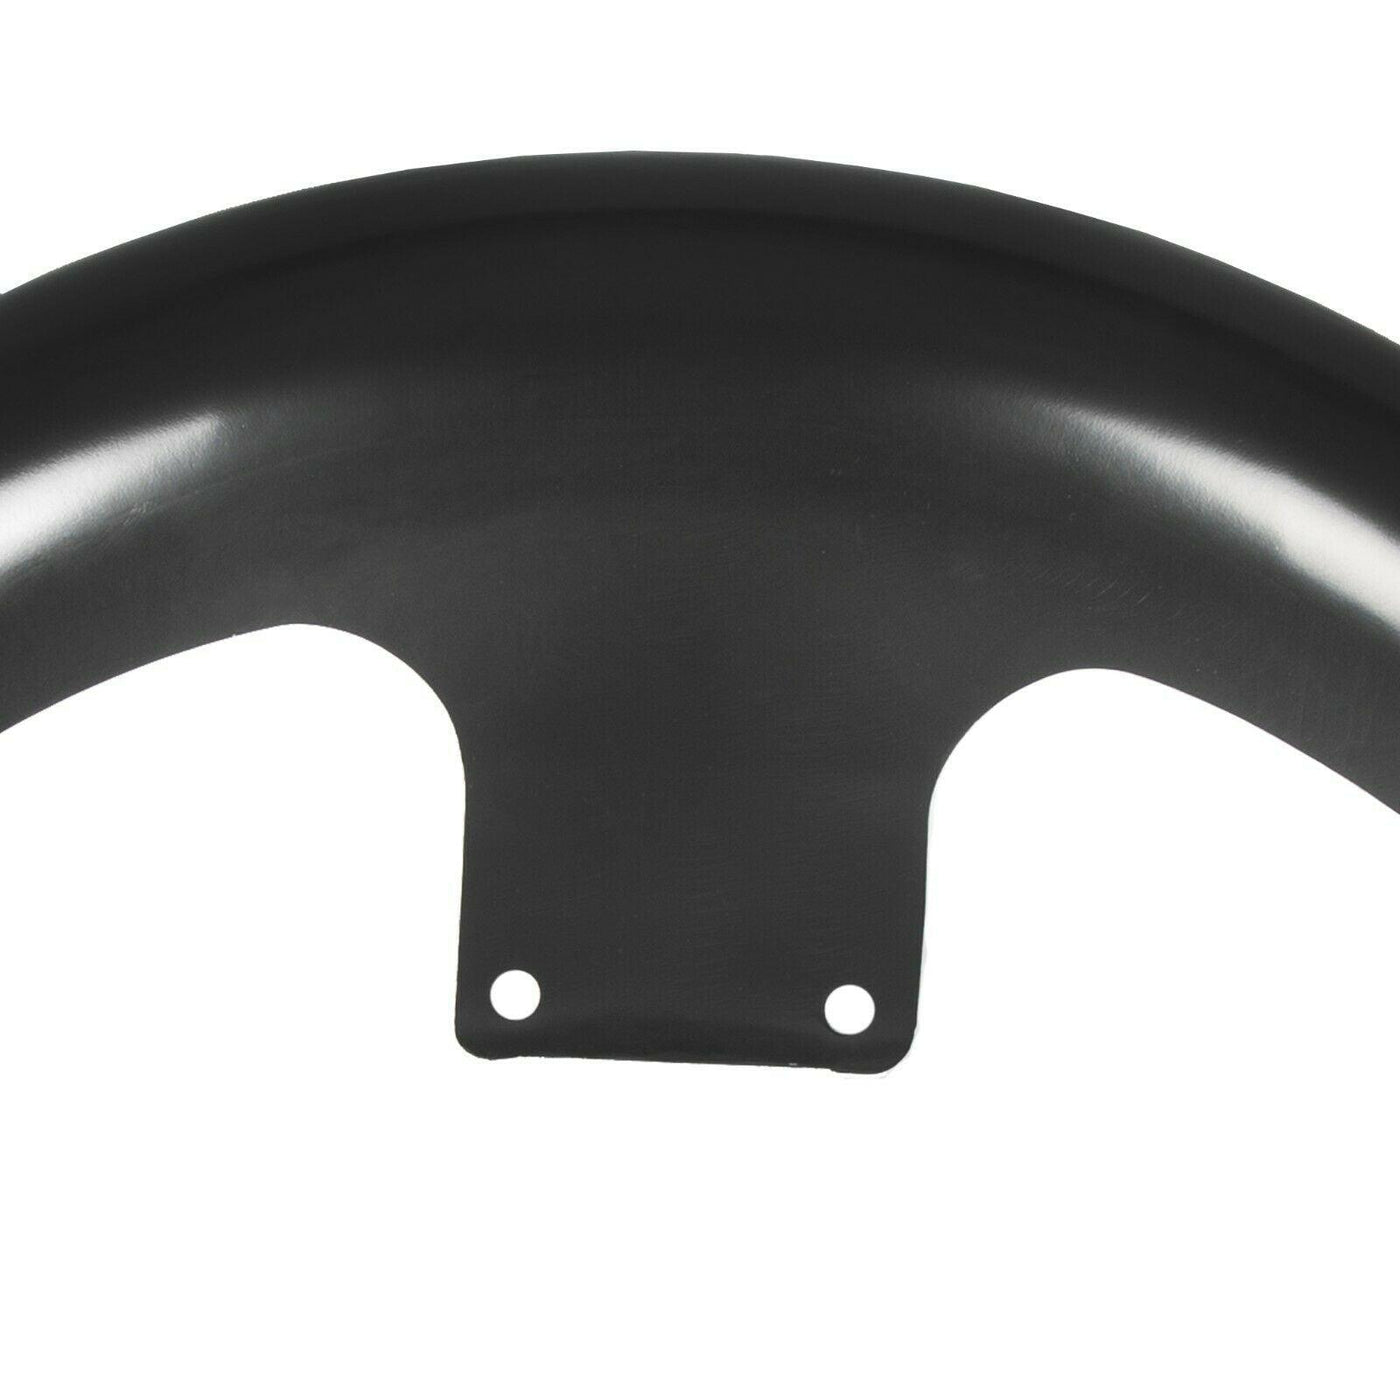 21" Wrap Front Fender Steel For Harley Touring Electra Street Road Glide Baggers - Moto Life Products